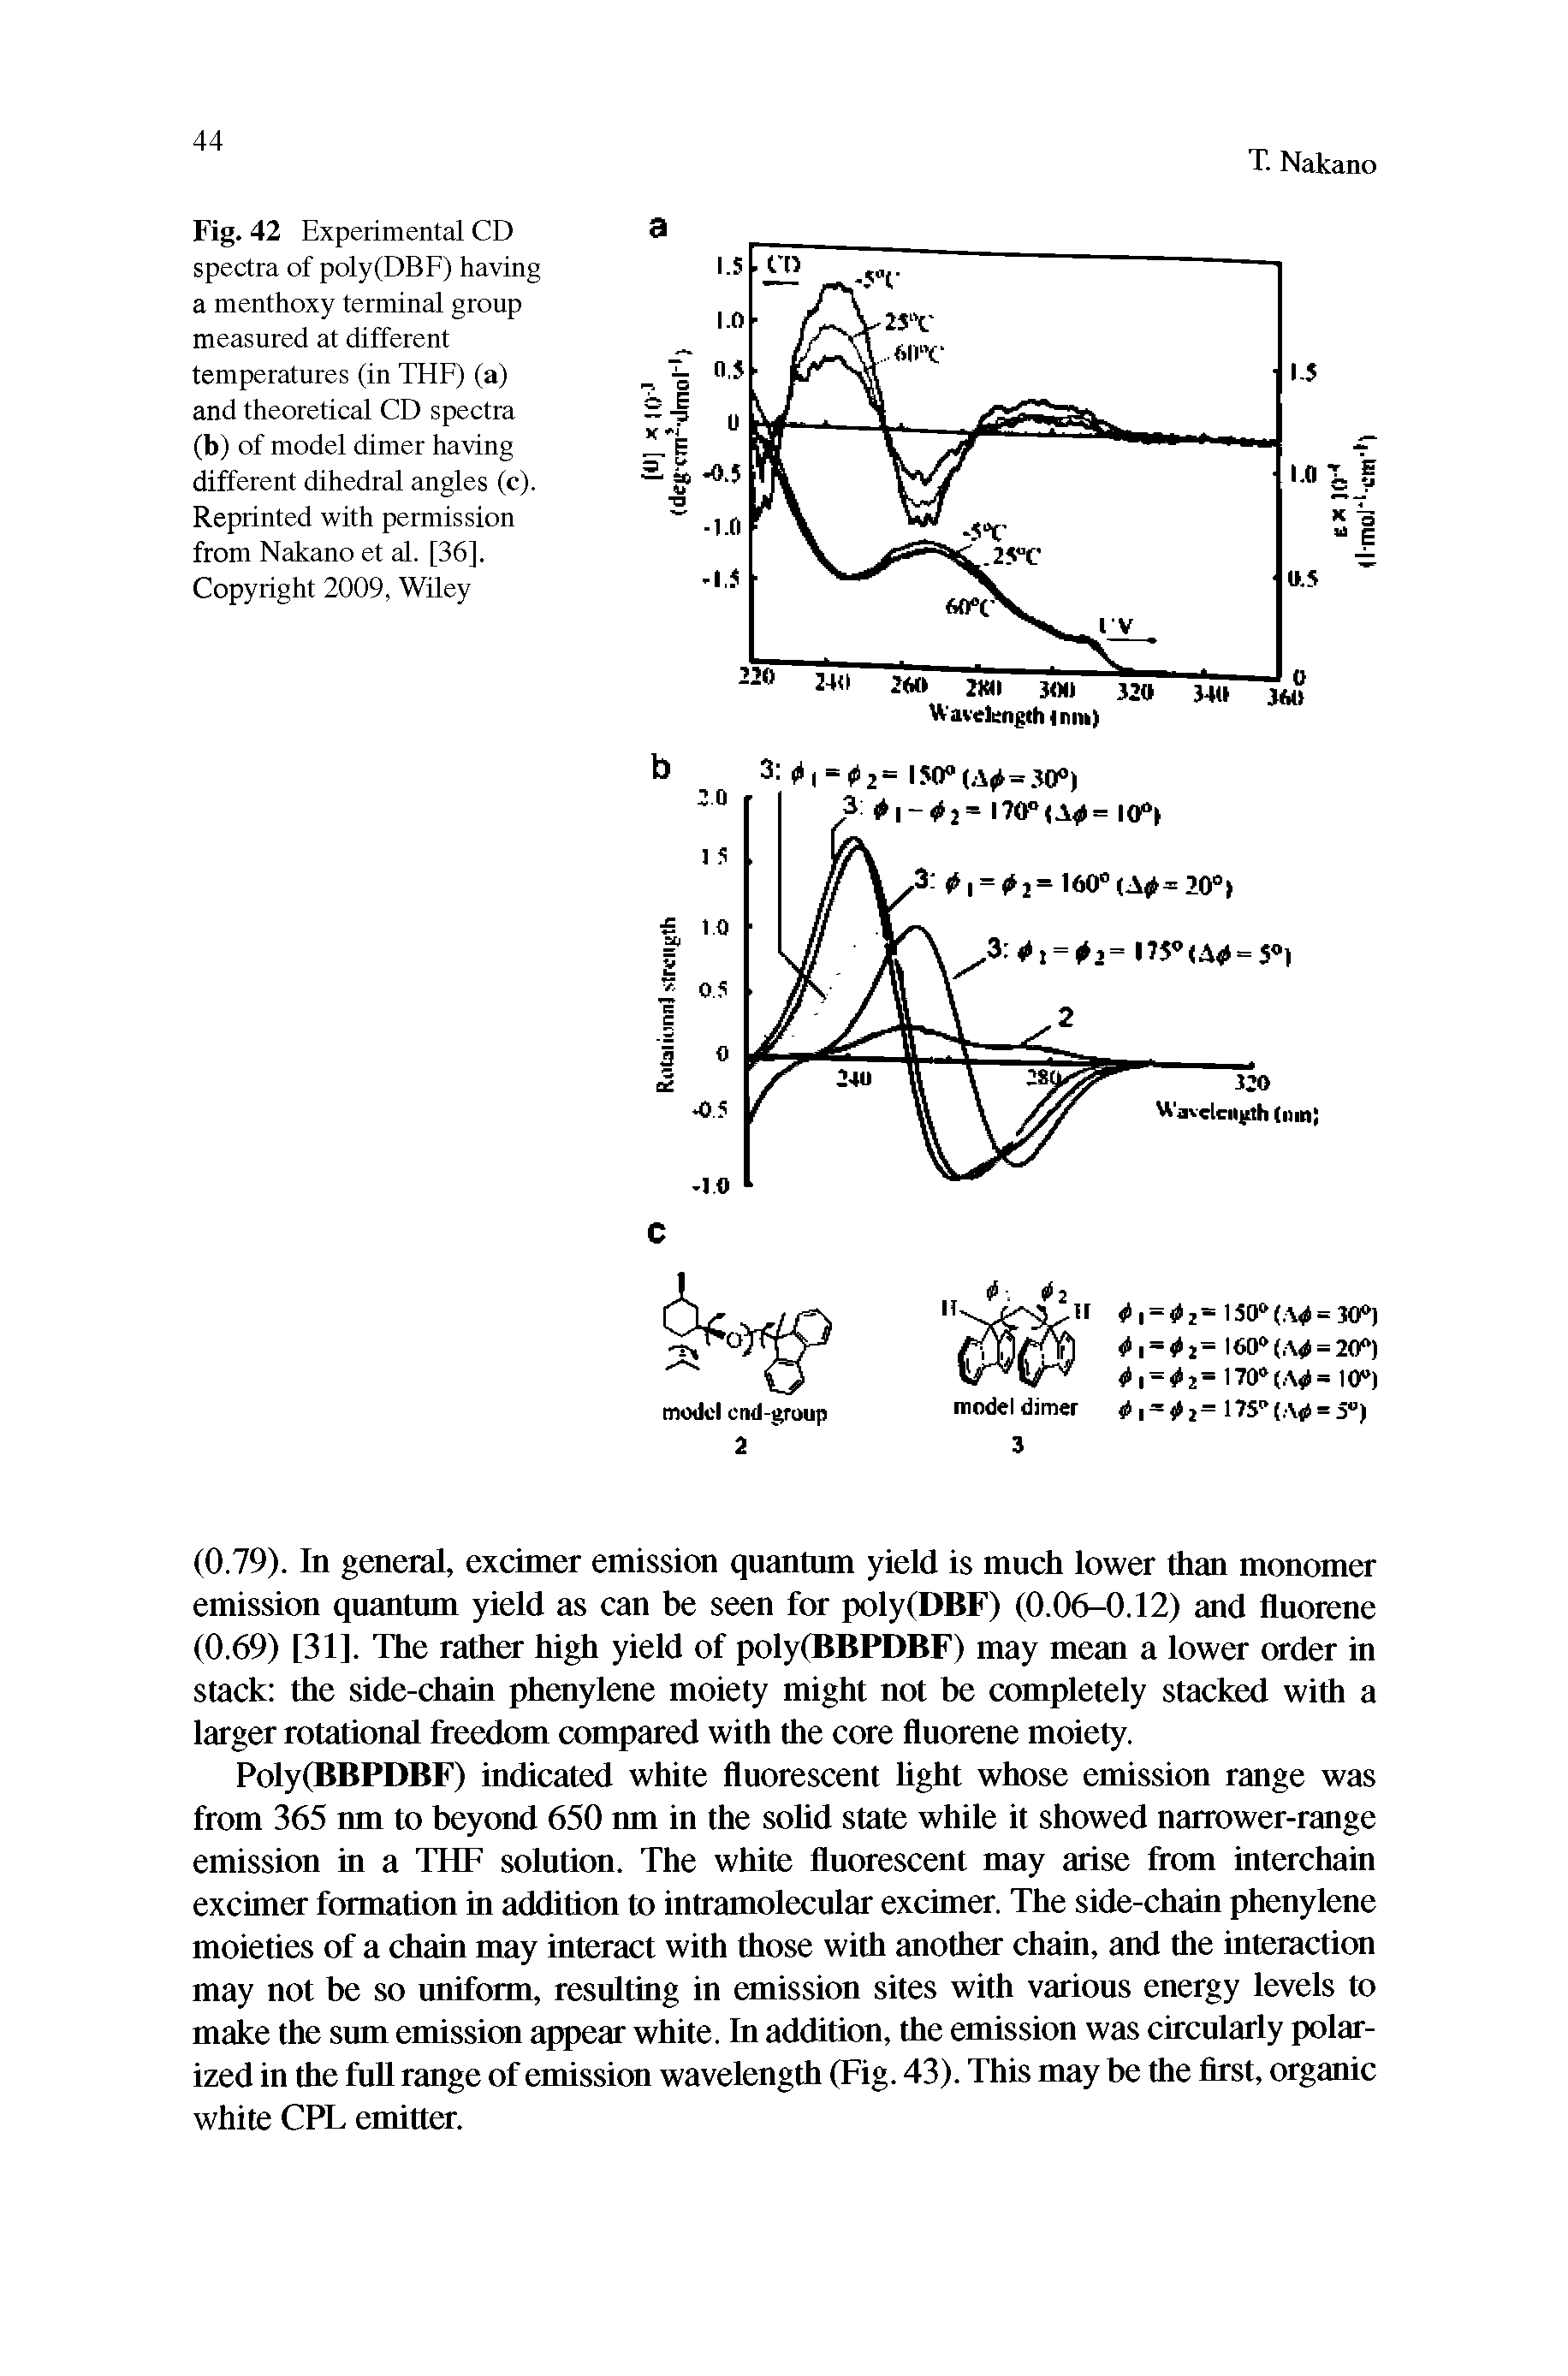 Fig. 42 Experimental CD spectra of poly(DBF) having a menthoxy terminal group measured at different temperatures (in THE) (a) and theoretical CD spectra (b) of model dimer having different dihedral angles (c). Reprinted with permission from Nakano et al. [36], Copyright 2009, Wiley...